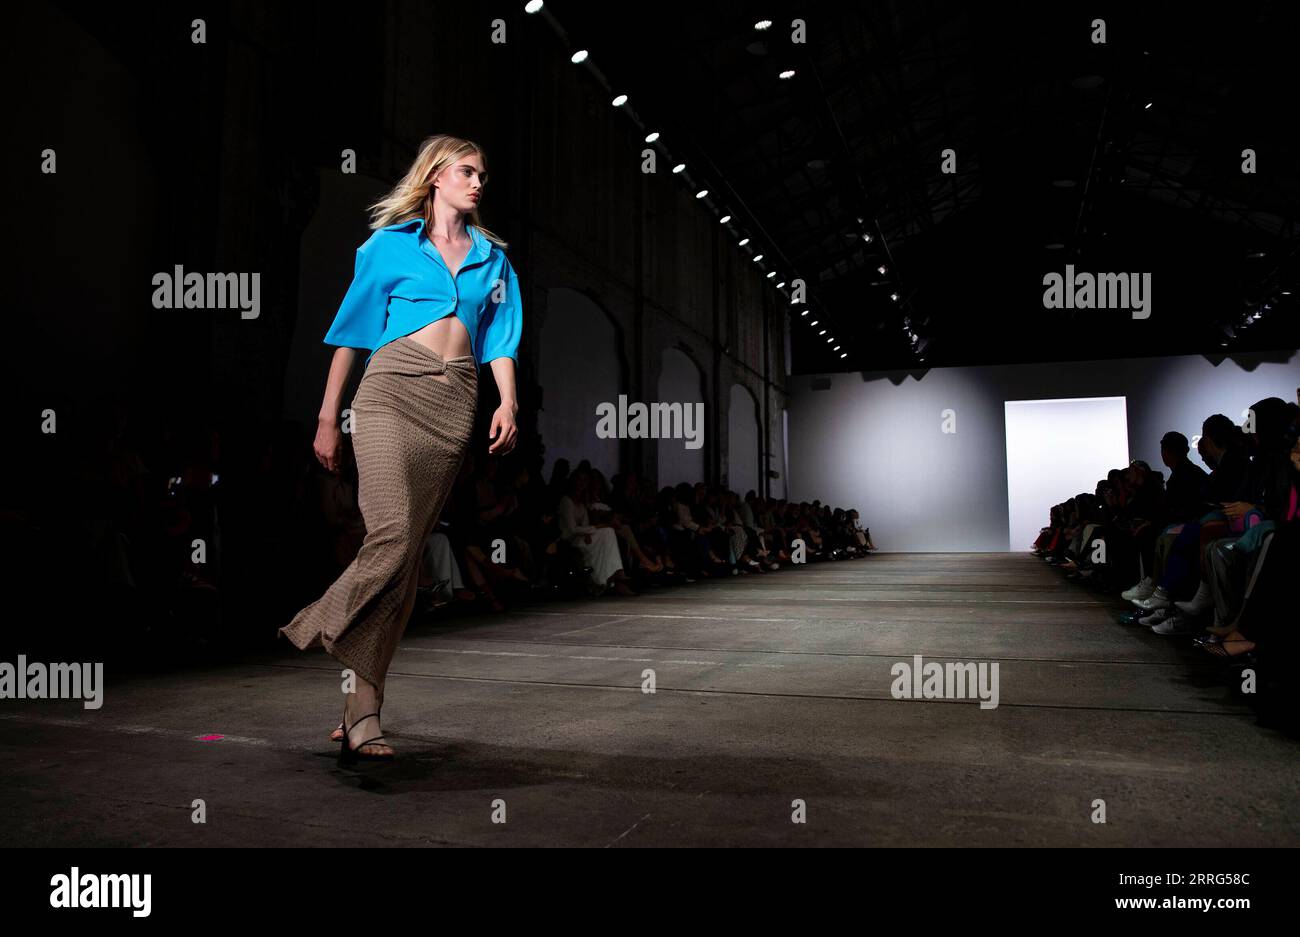 220509 -- SYDNEY, May 9, 2022 -- A model walks on catwalk during the Afterpay Australian Fashion Week AAFW in Sydney, Australia, on May 9, 2022. The AAFW kicked off on Monday with an array of local brands showcasing their resort collections in Sydney.  AUSTRALIA-SYDNEY-FASHION WEEK BaixXuefei PUBLICATIONxNOTxINxCHN Stock Photo